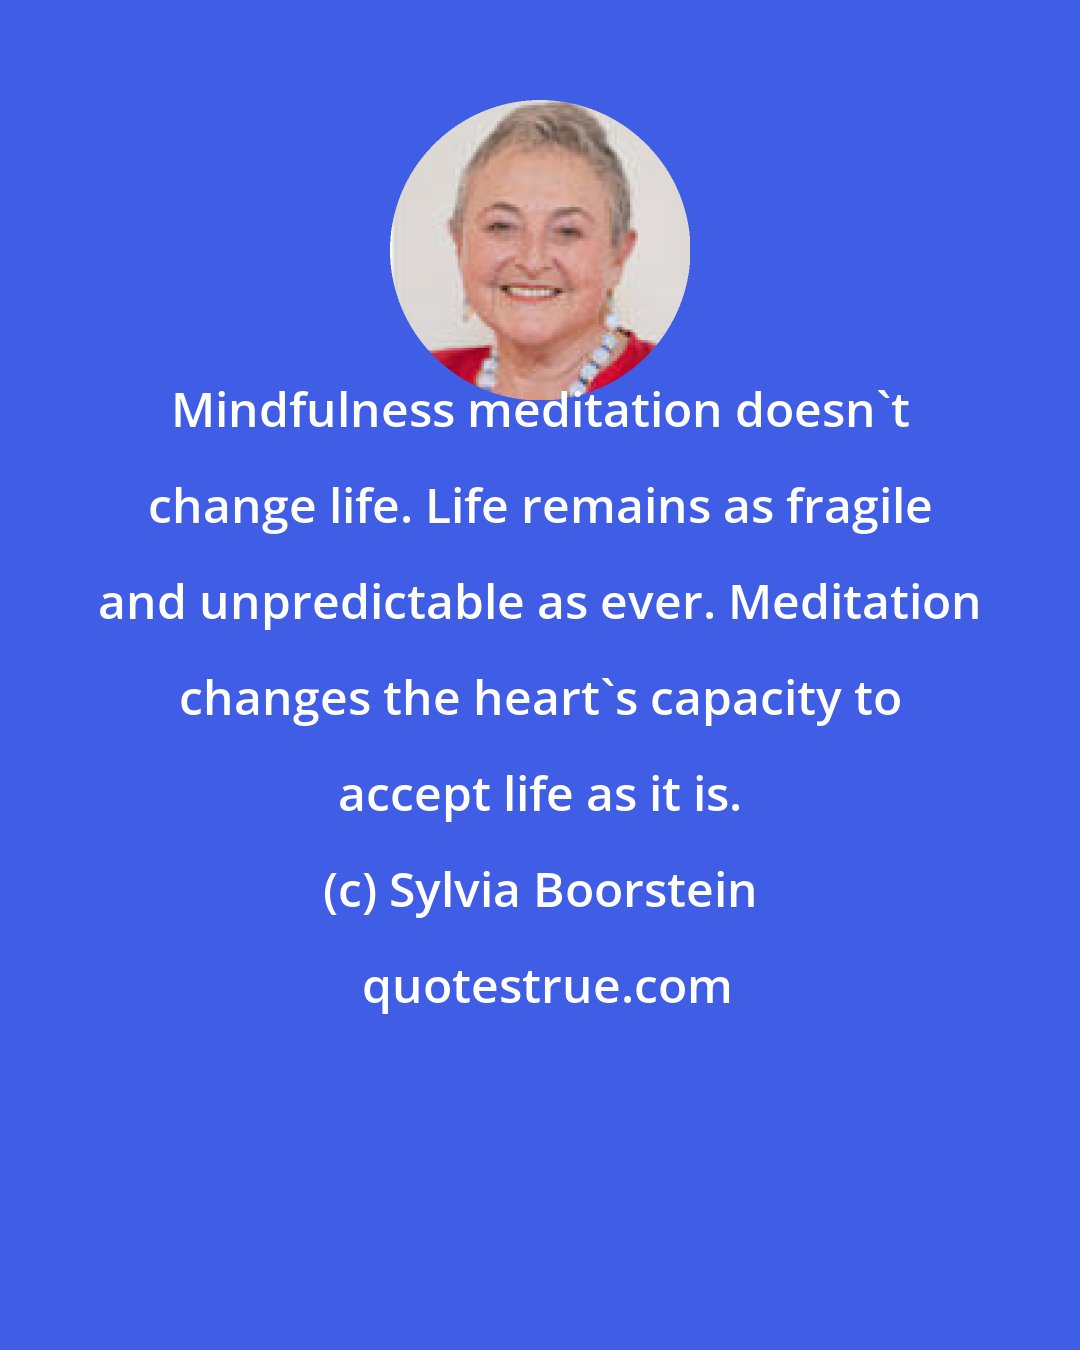 Sylvia Boorstein: Mindfulness meditation doesn't change life. Life remains as fragile and unpredictable as ever. Meditation changes the heart's capacity to accept life as it is.